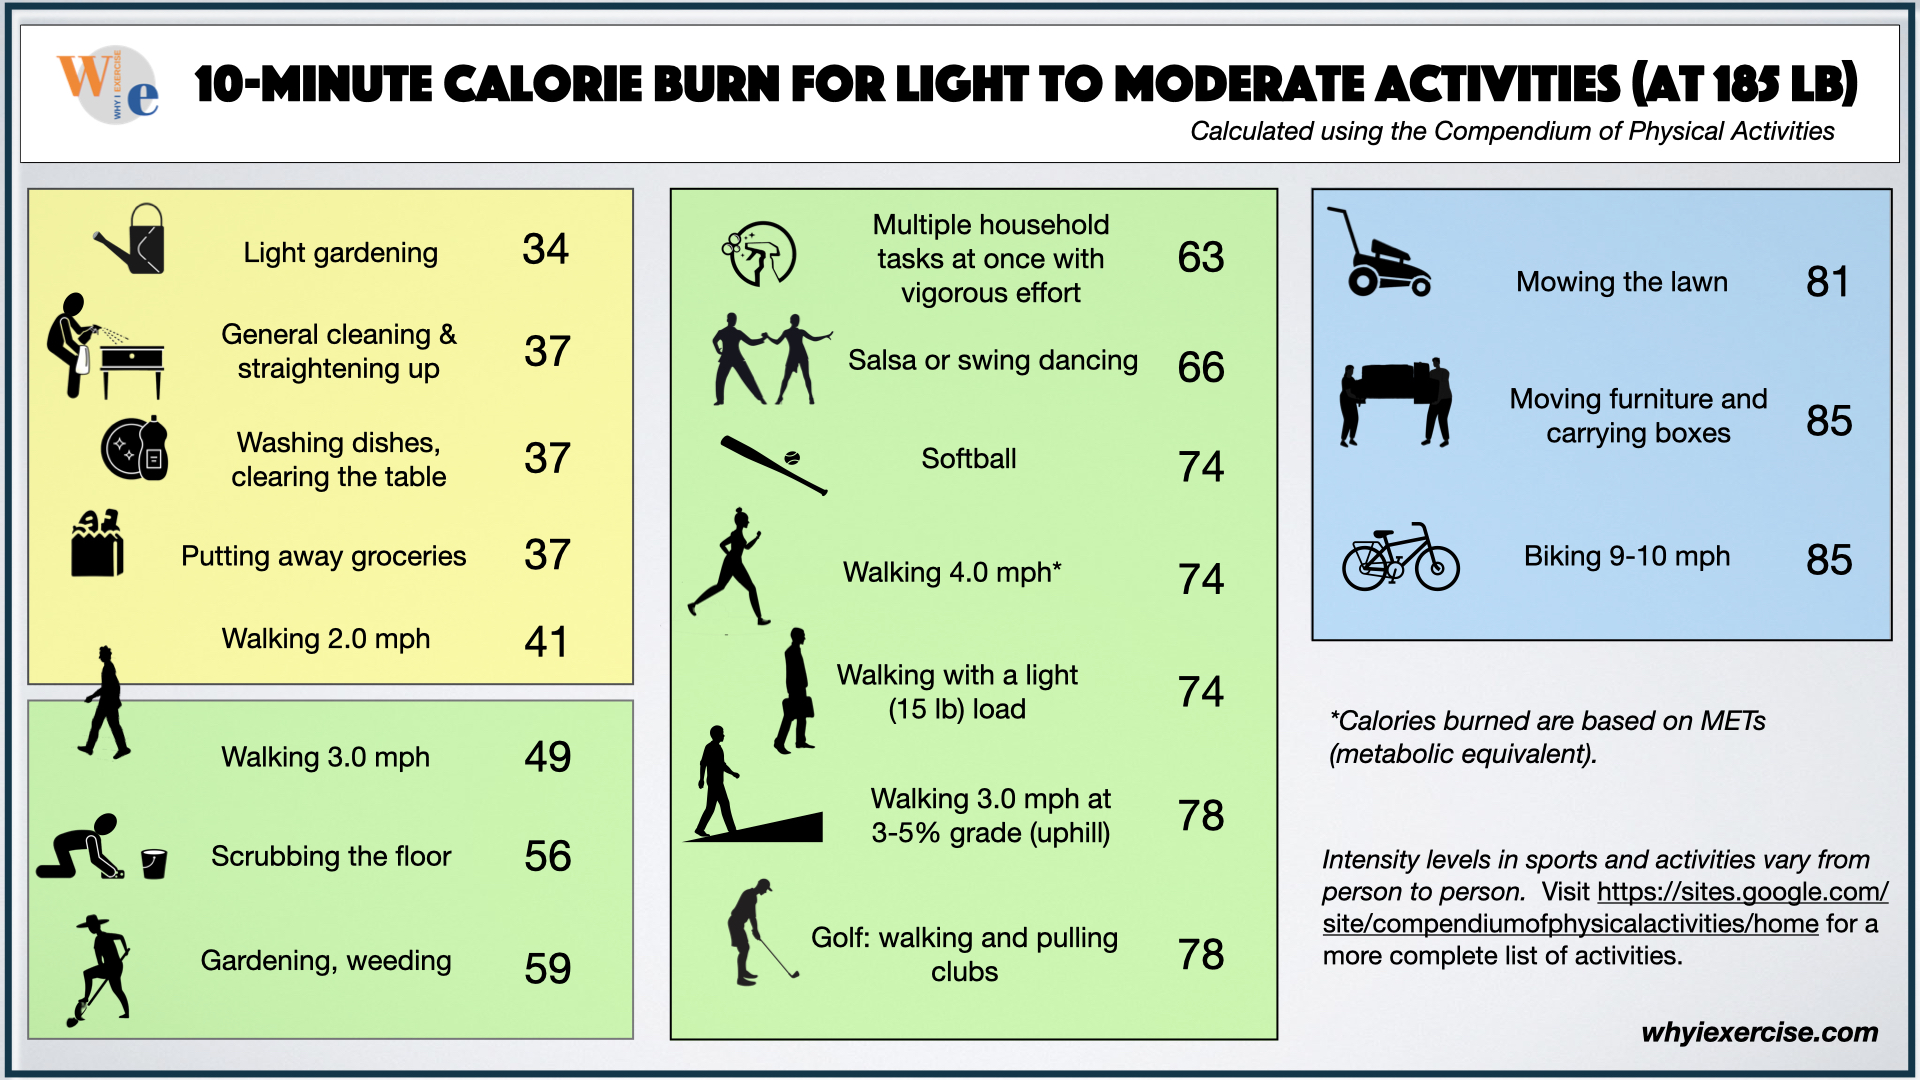 Calories burned in 10 min of various intensity activities at the weight of 185 lb